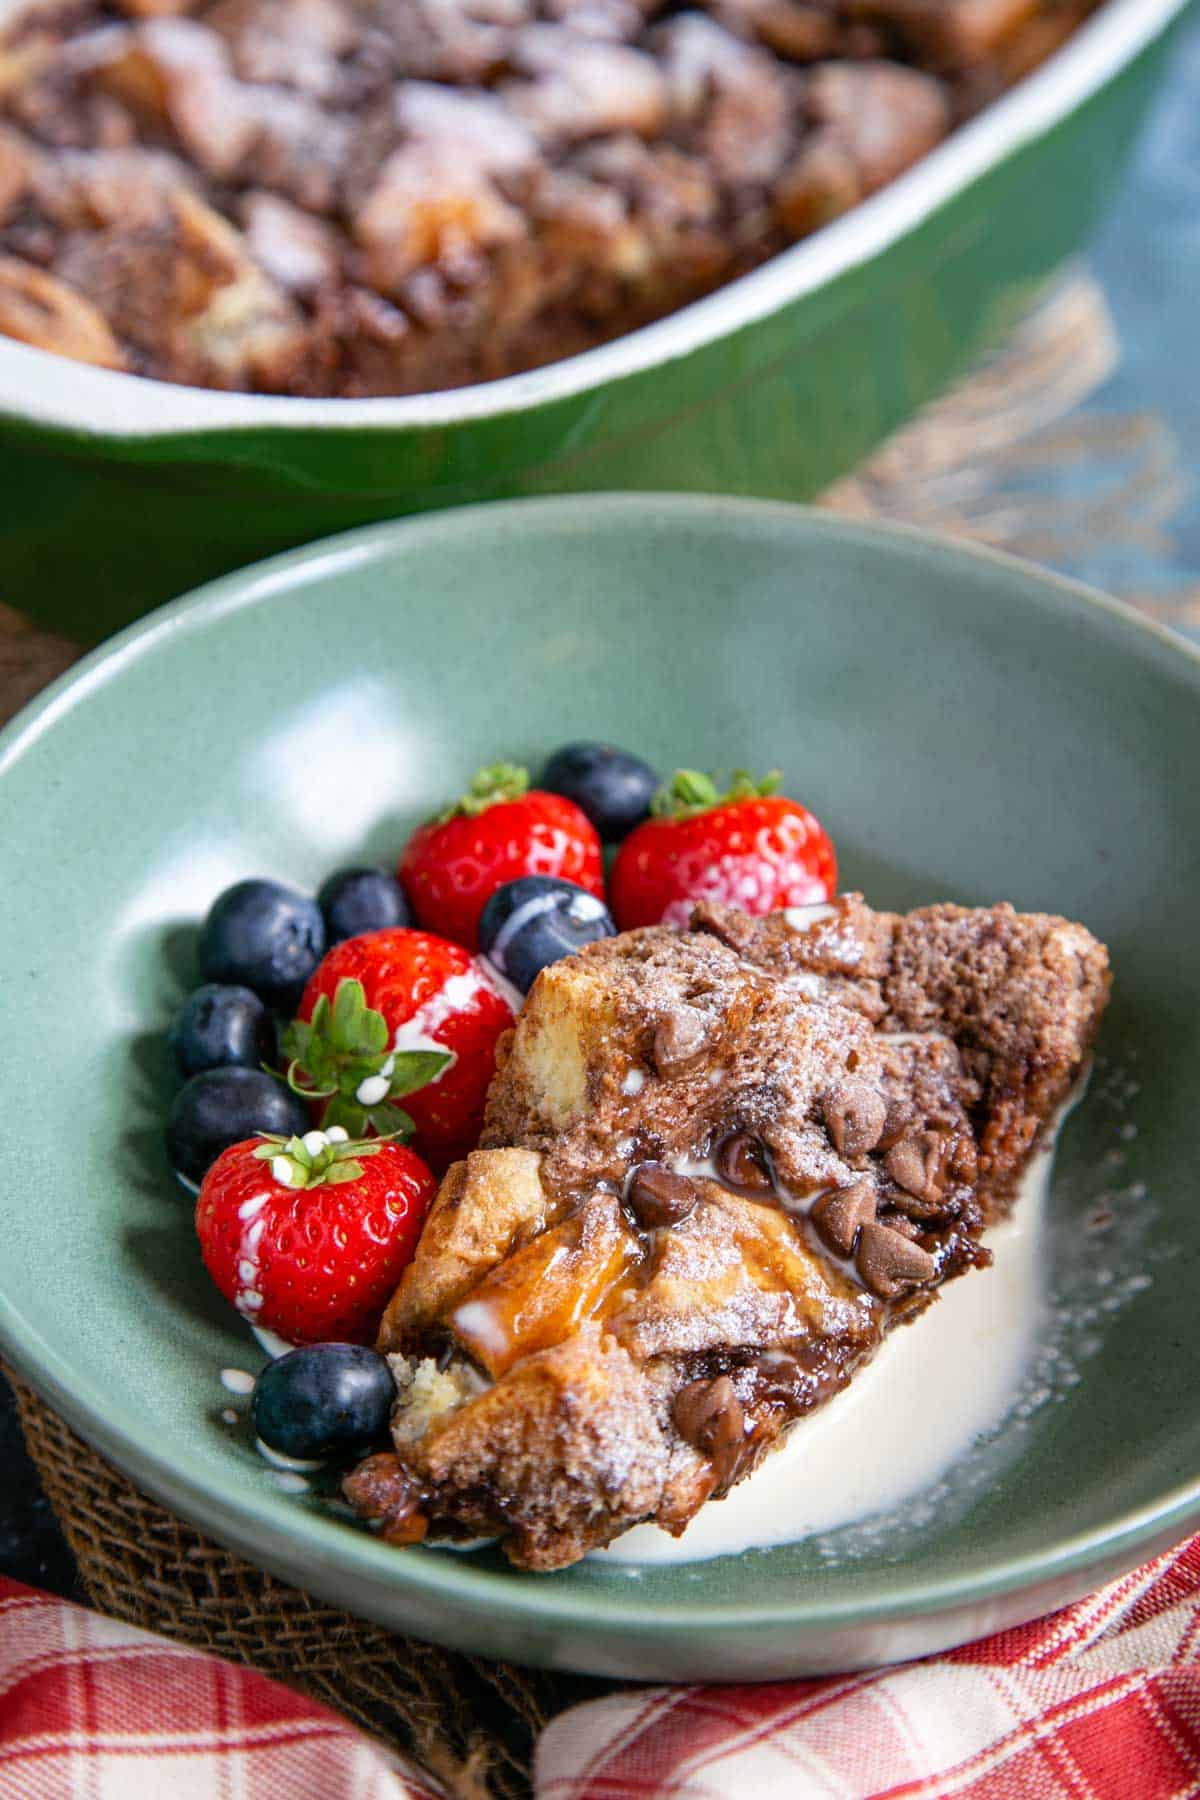 a pretty green bowl of chocolate hazelnut bread and butter pudding with fresh berries and cream